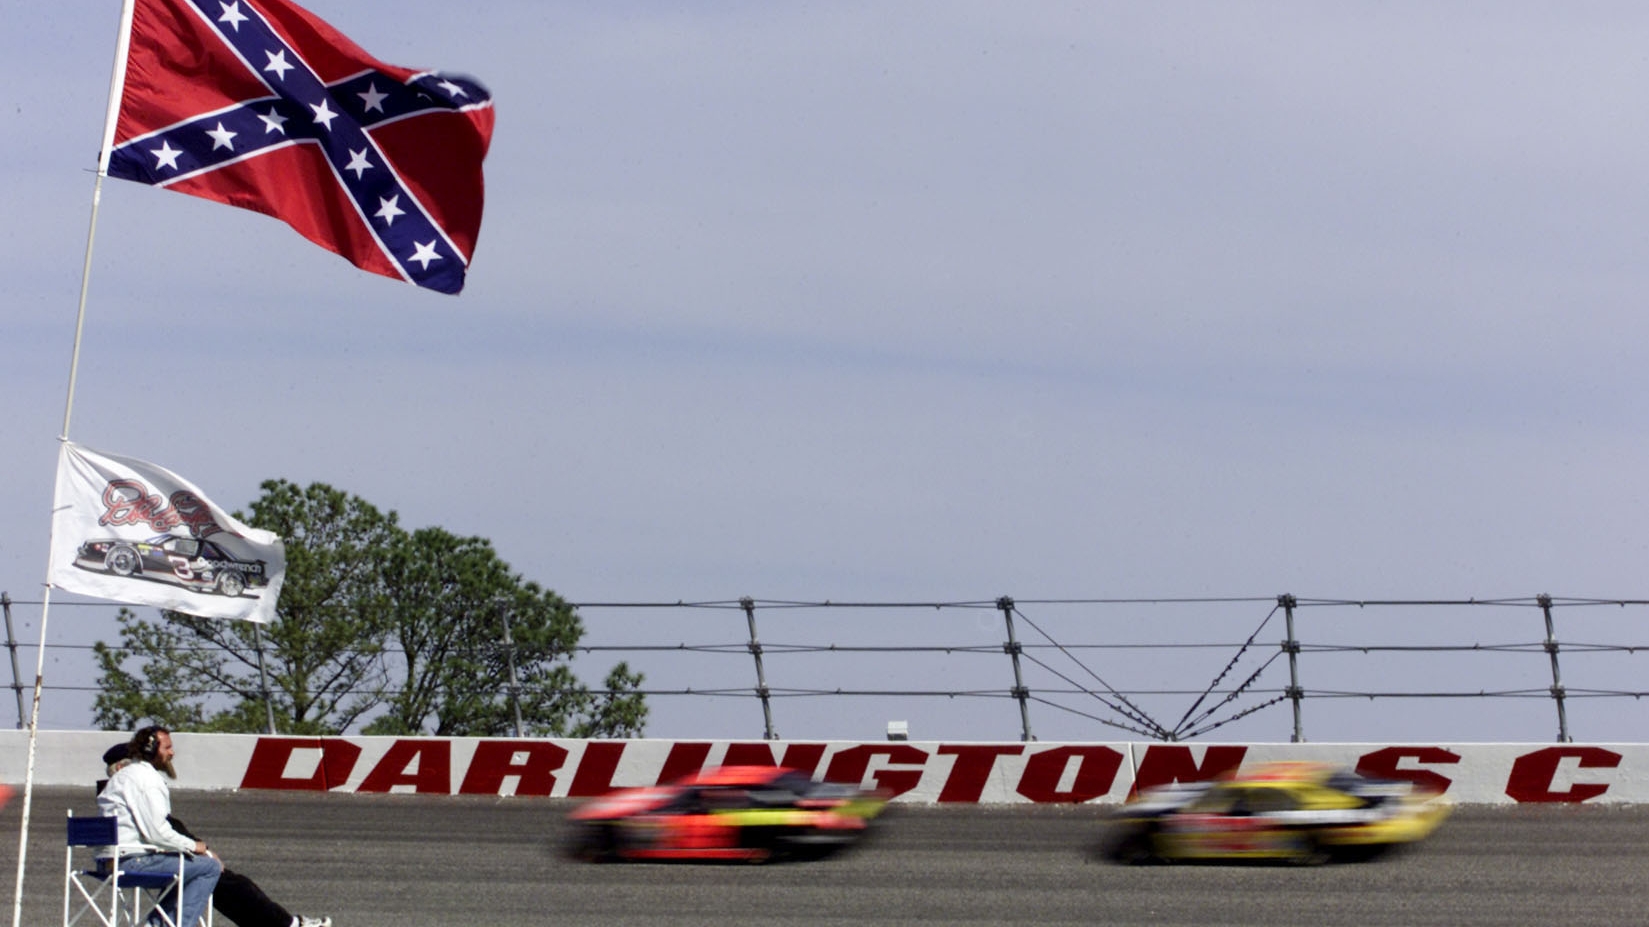 Why banning Confederate flags from NASCAR once seemed improbable